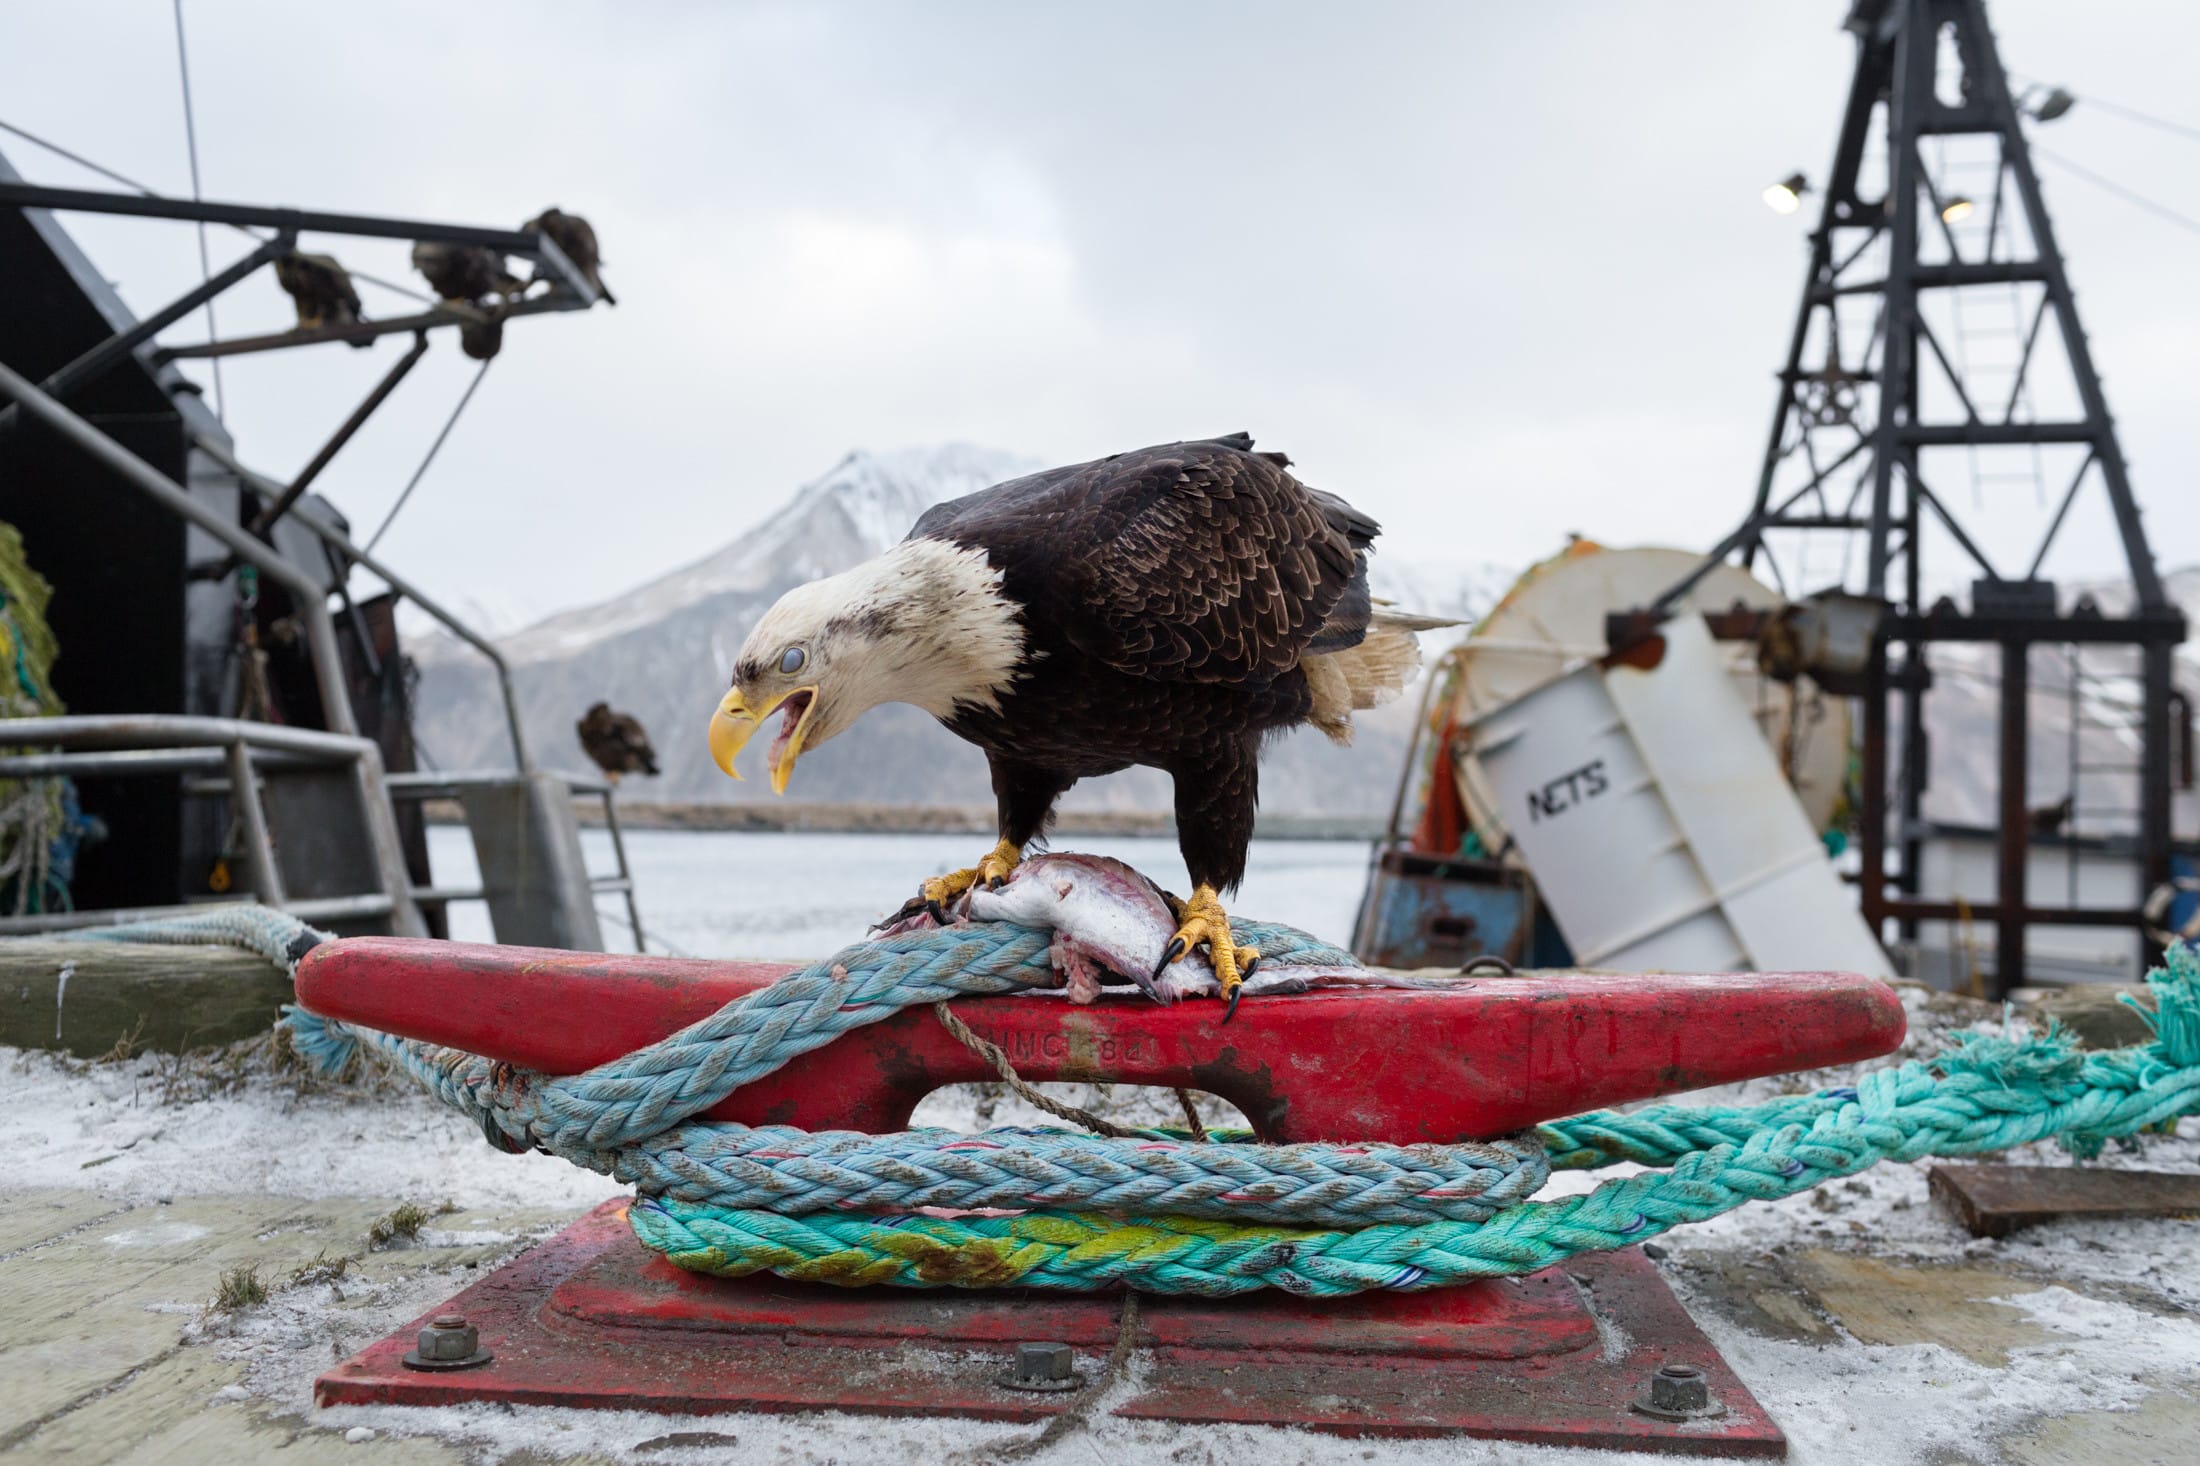 Photographing the Remote, Snowy World of Alaskan Fishing Ships